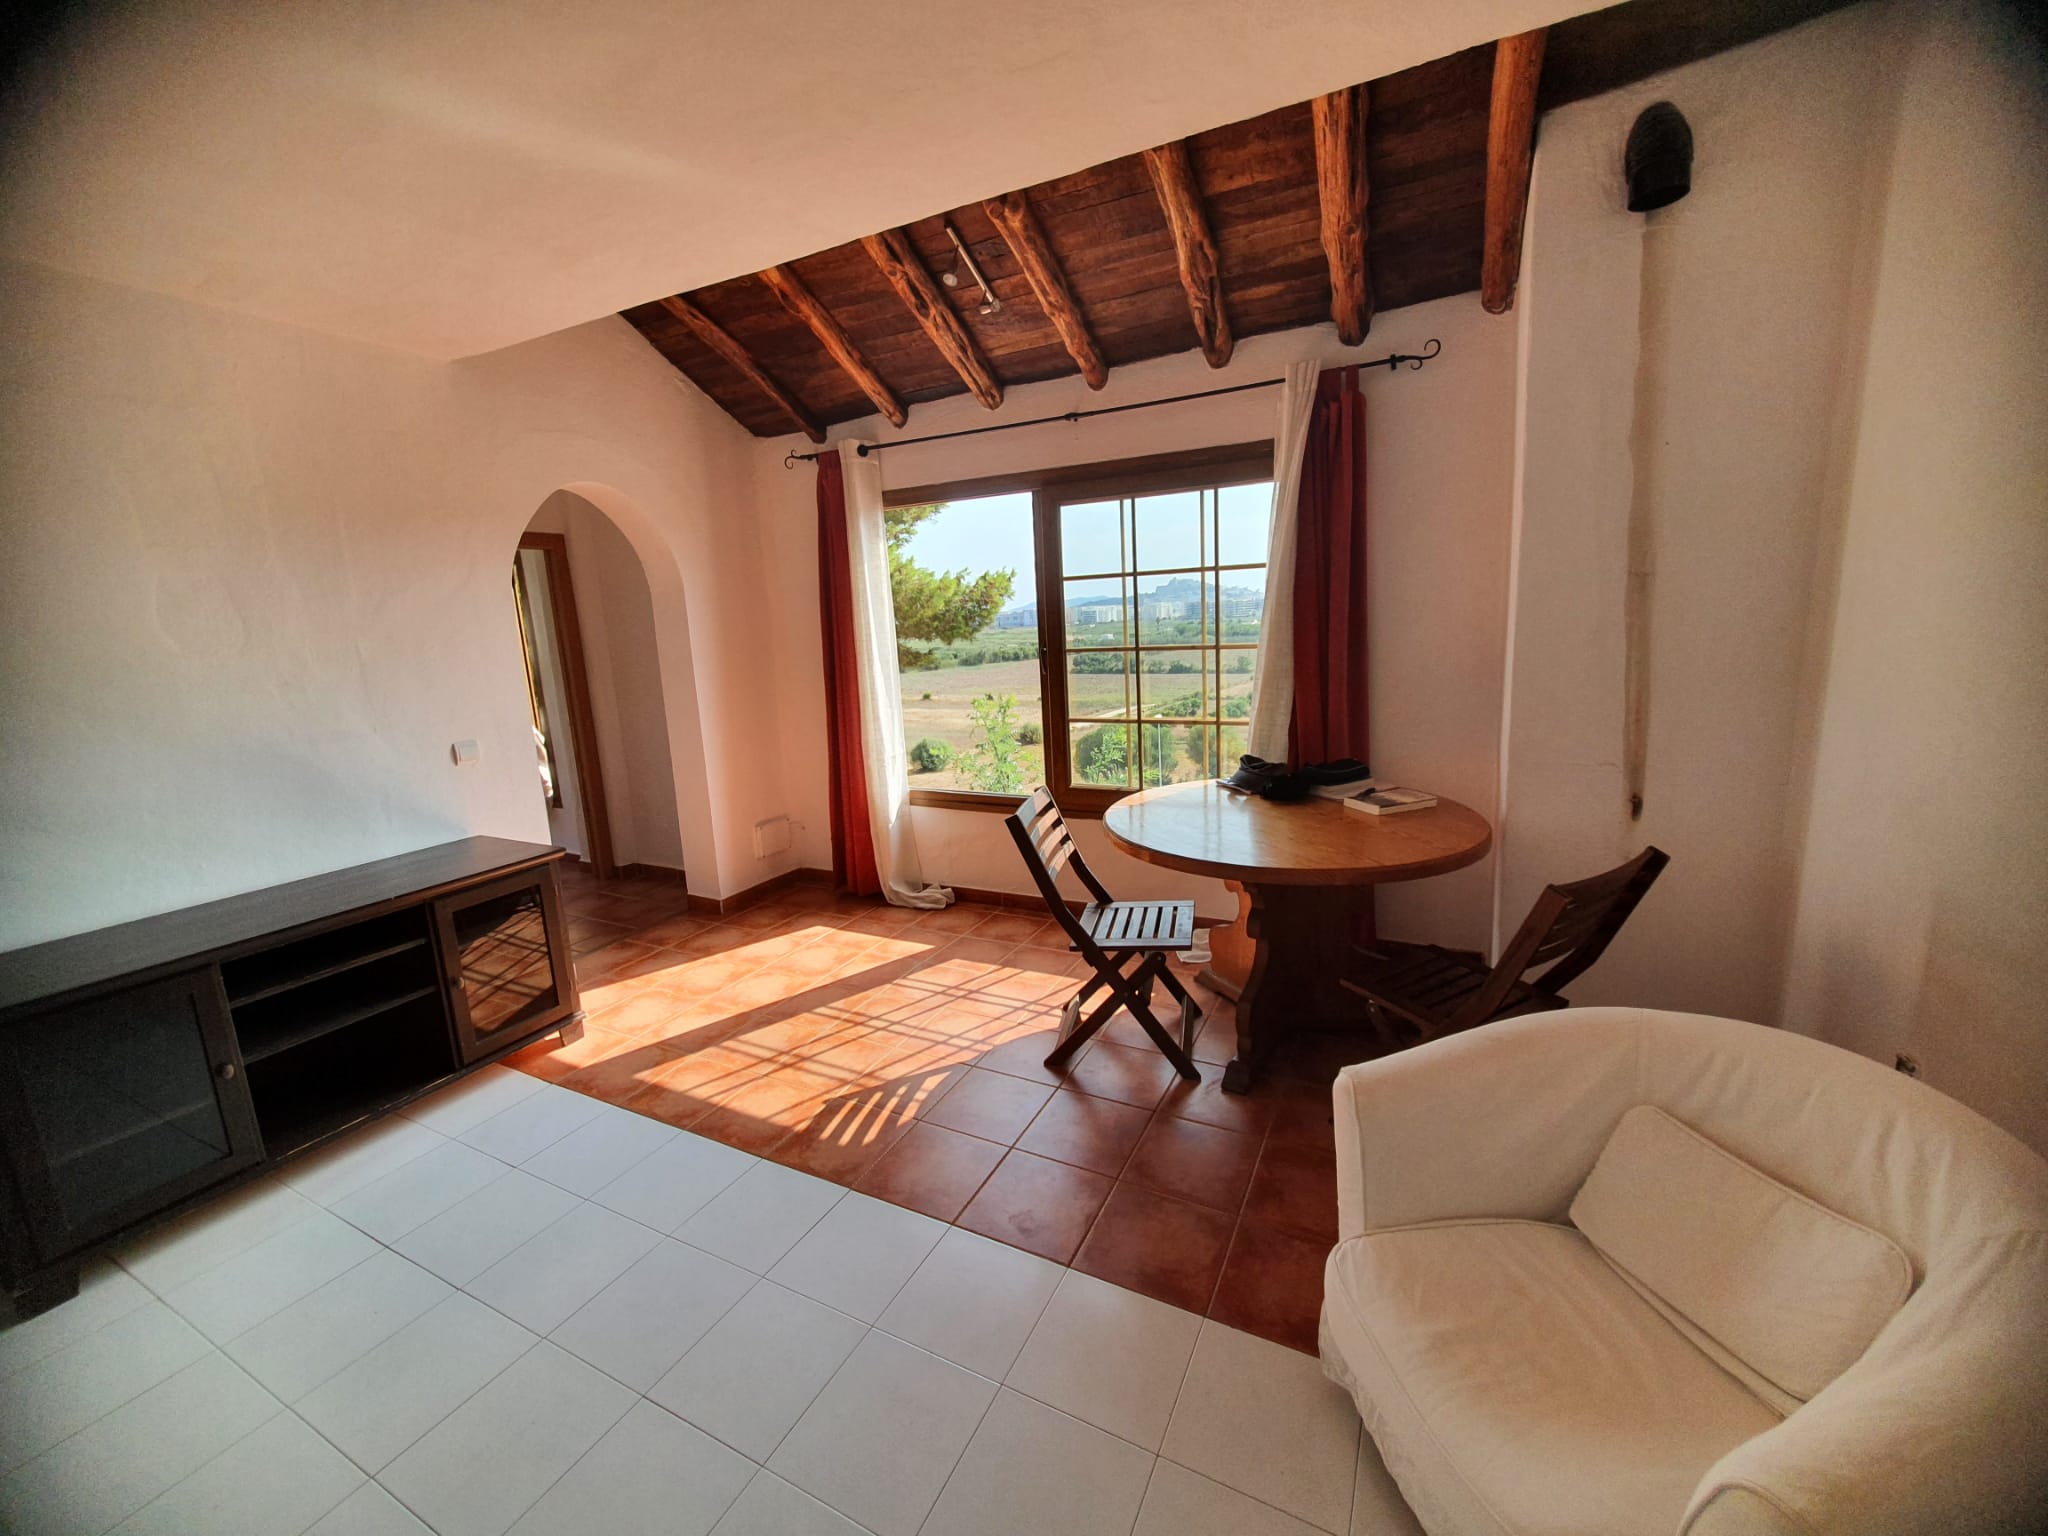 Spacious property for sale near Talamanca beach in need of renovation